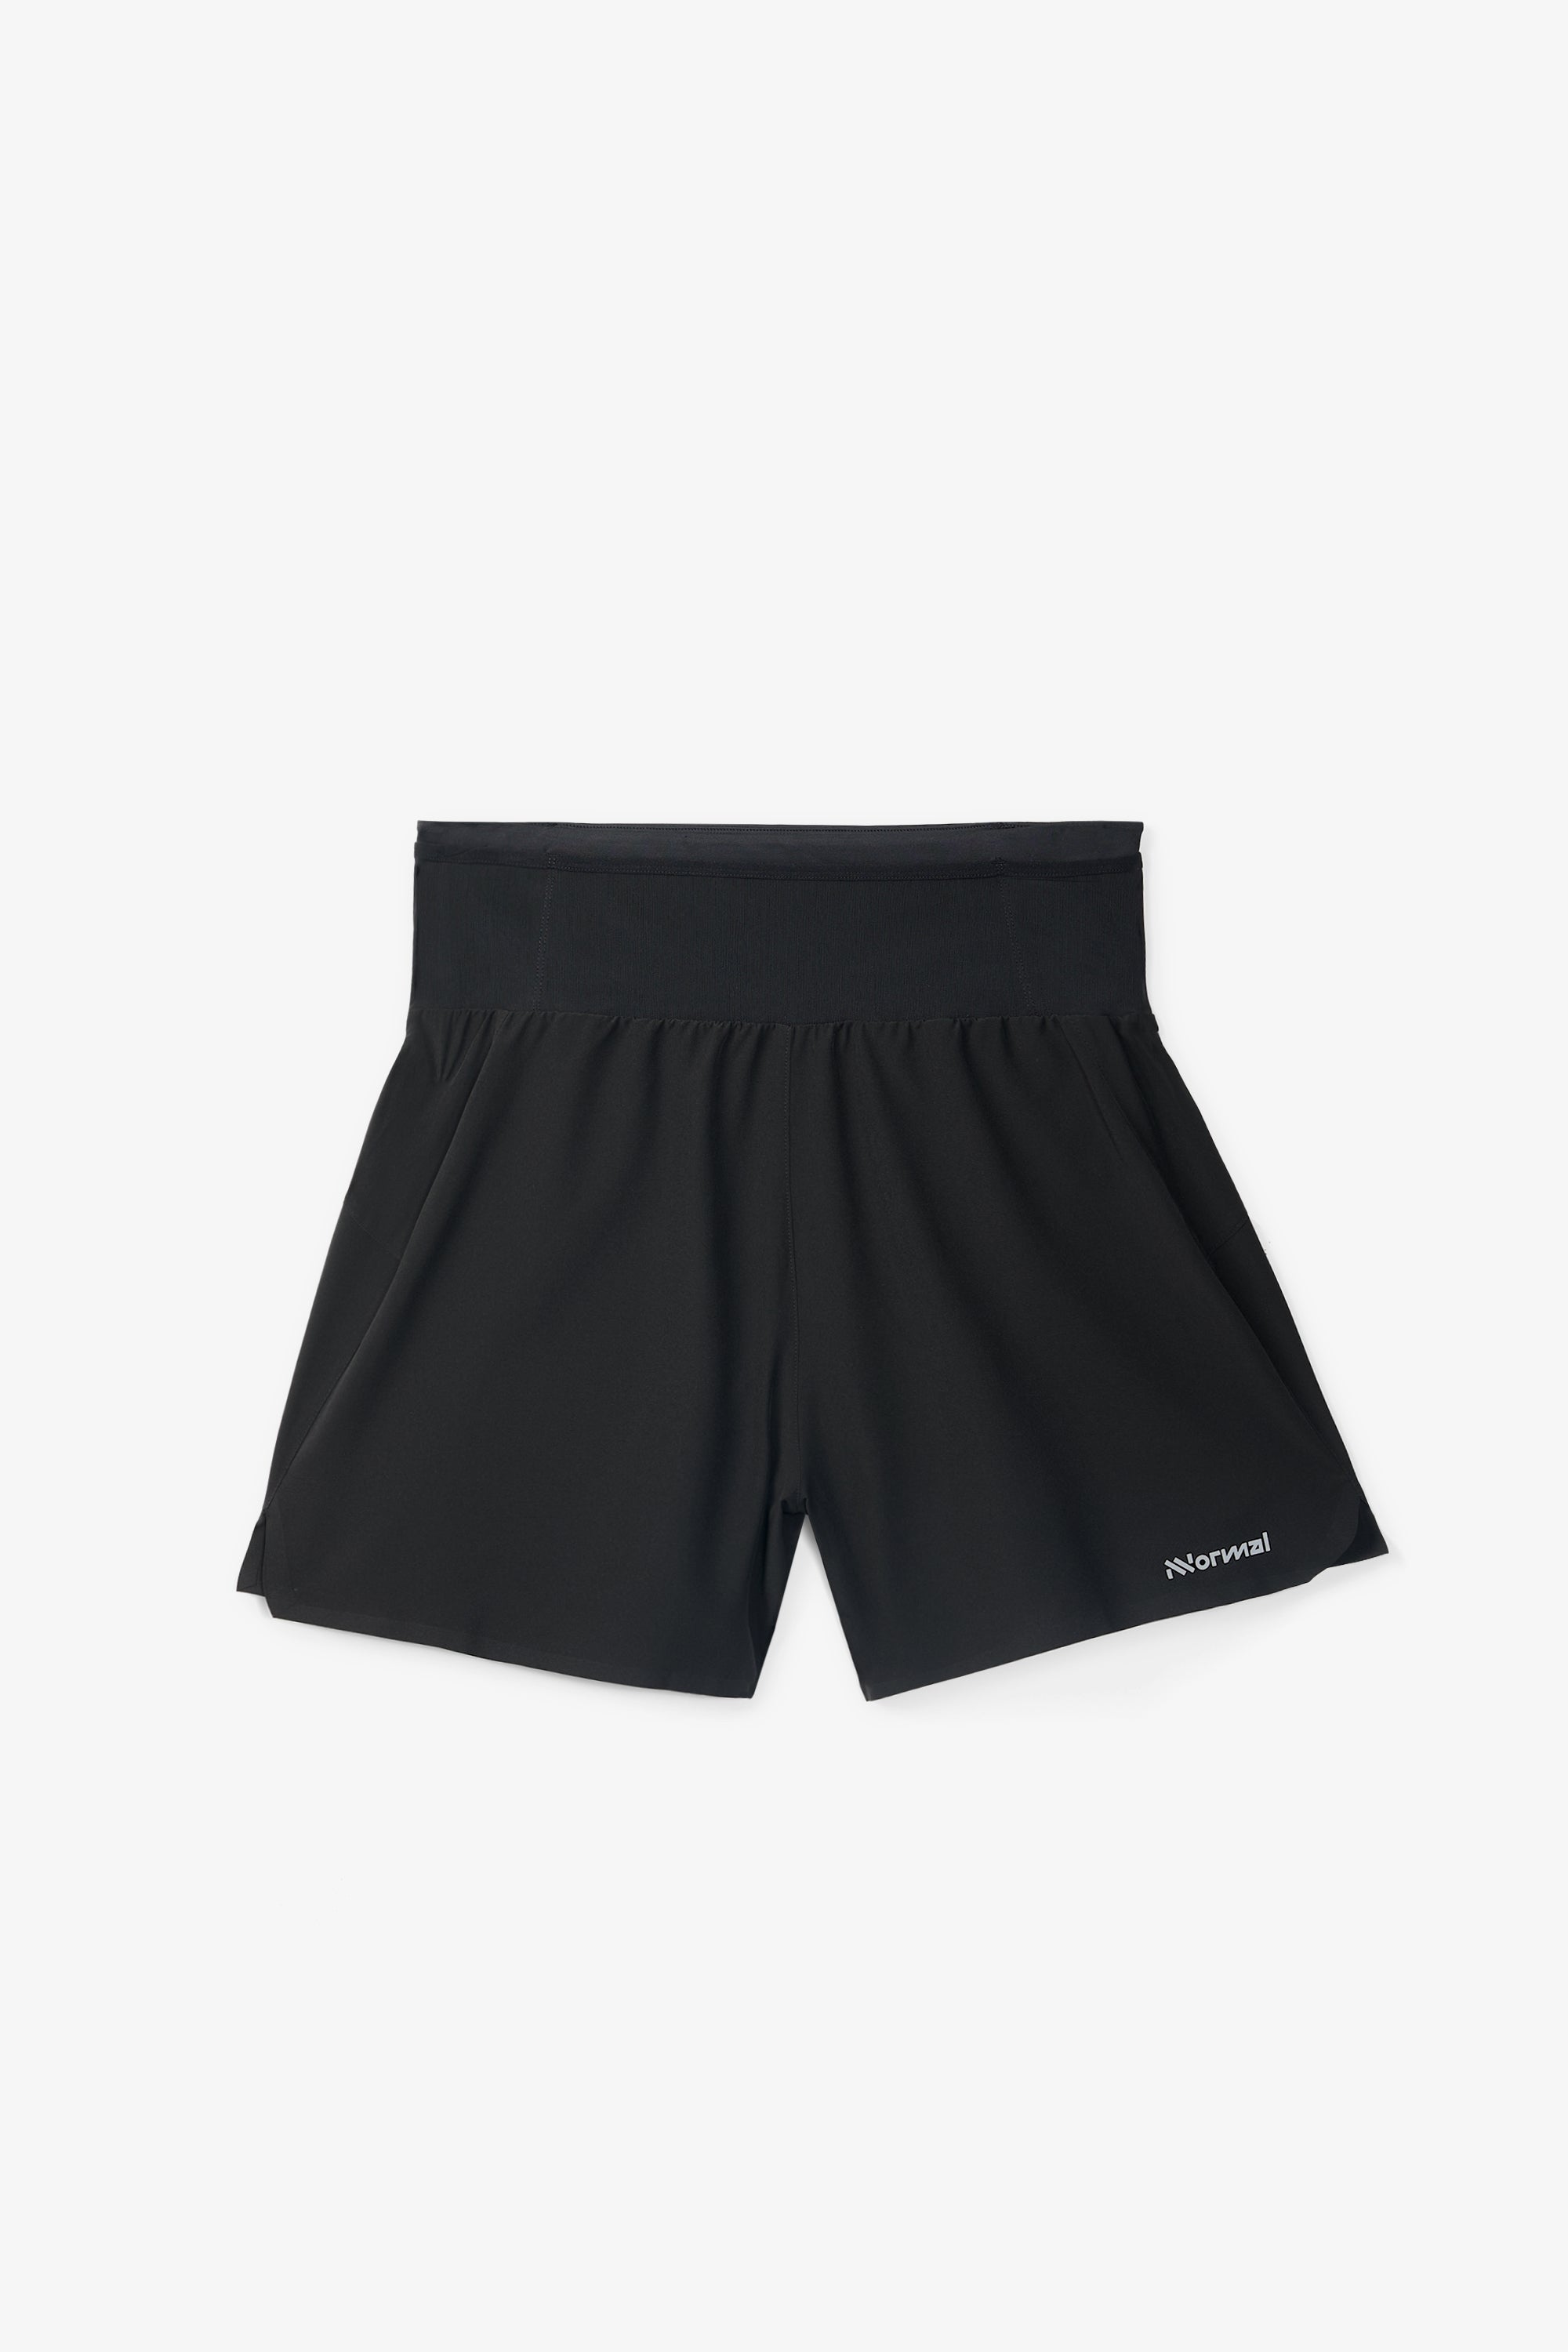 NNORMAL RACE SHORT W